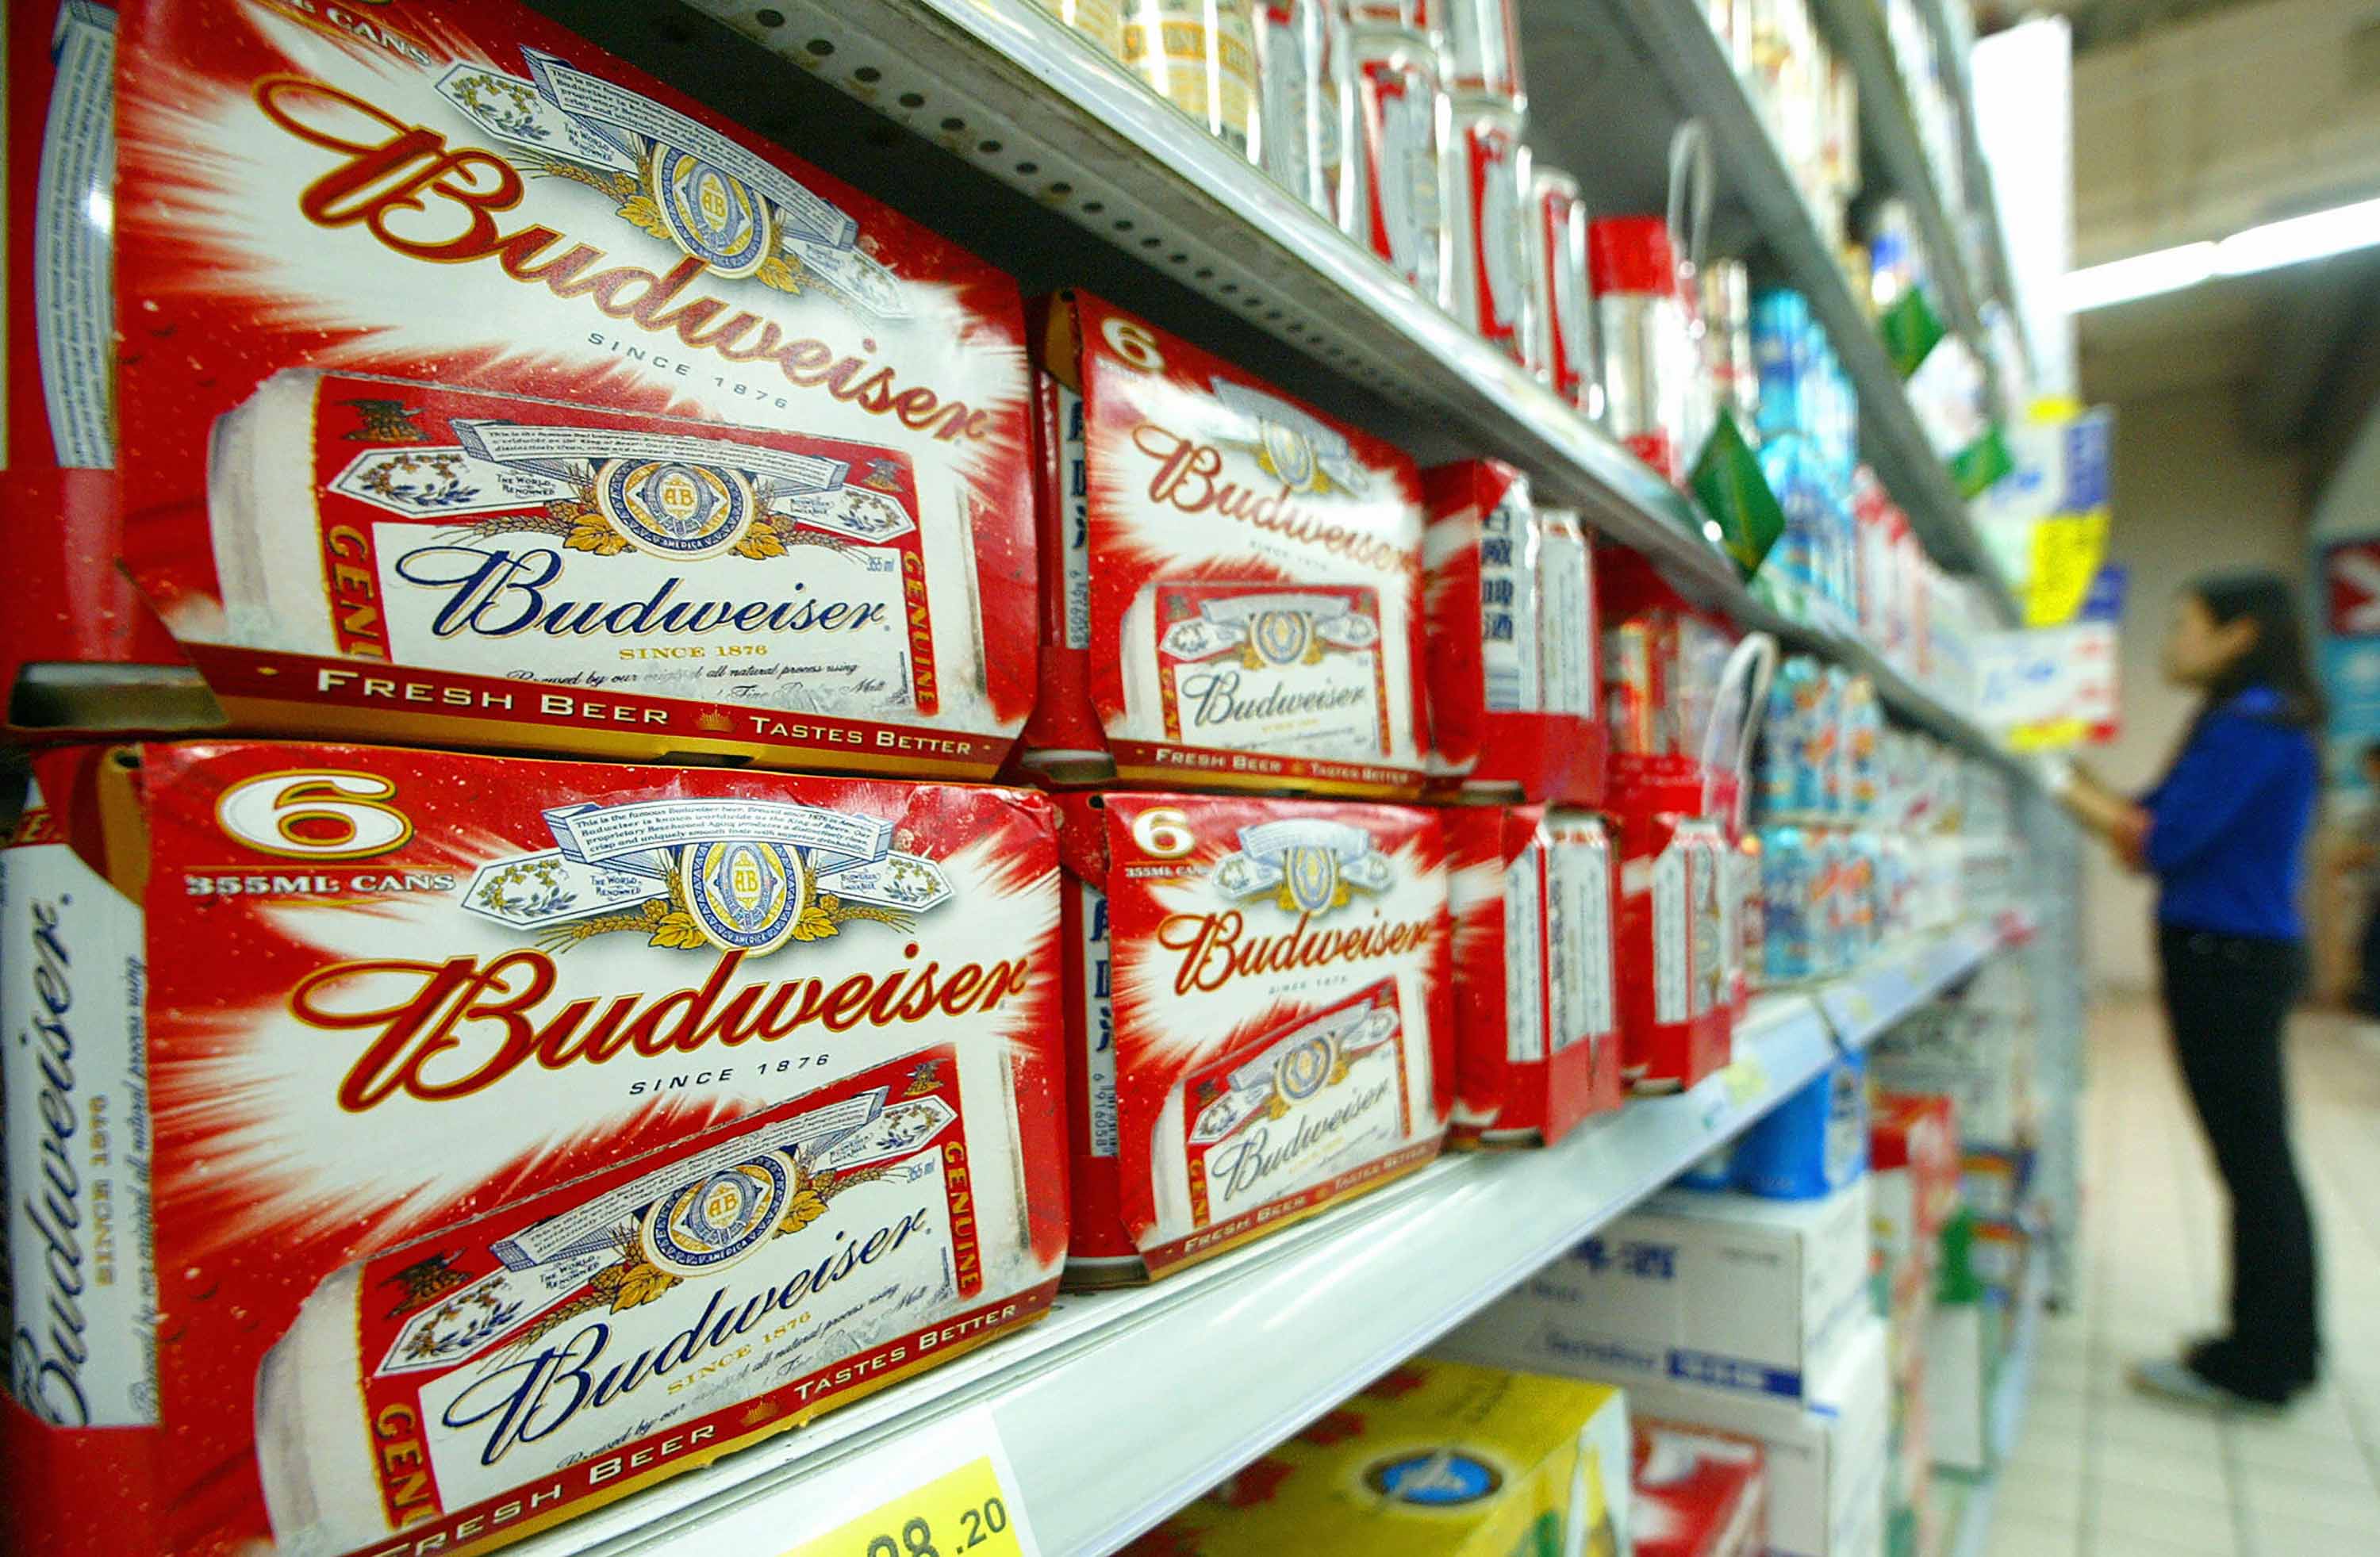 Fall in Bud Light Sales Puts Dent in Anheuser-Busch's Earnings